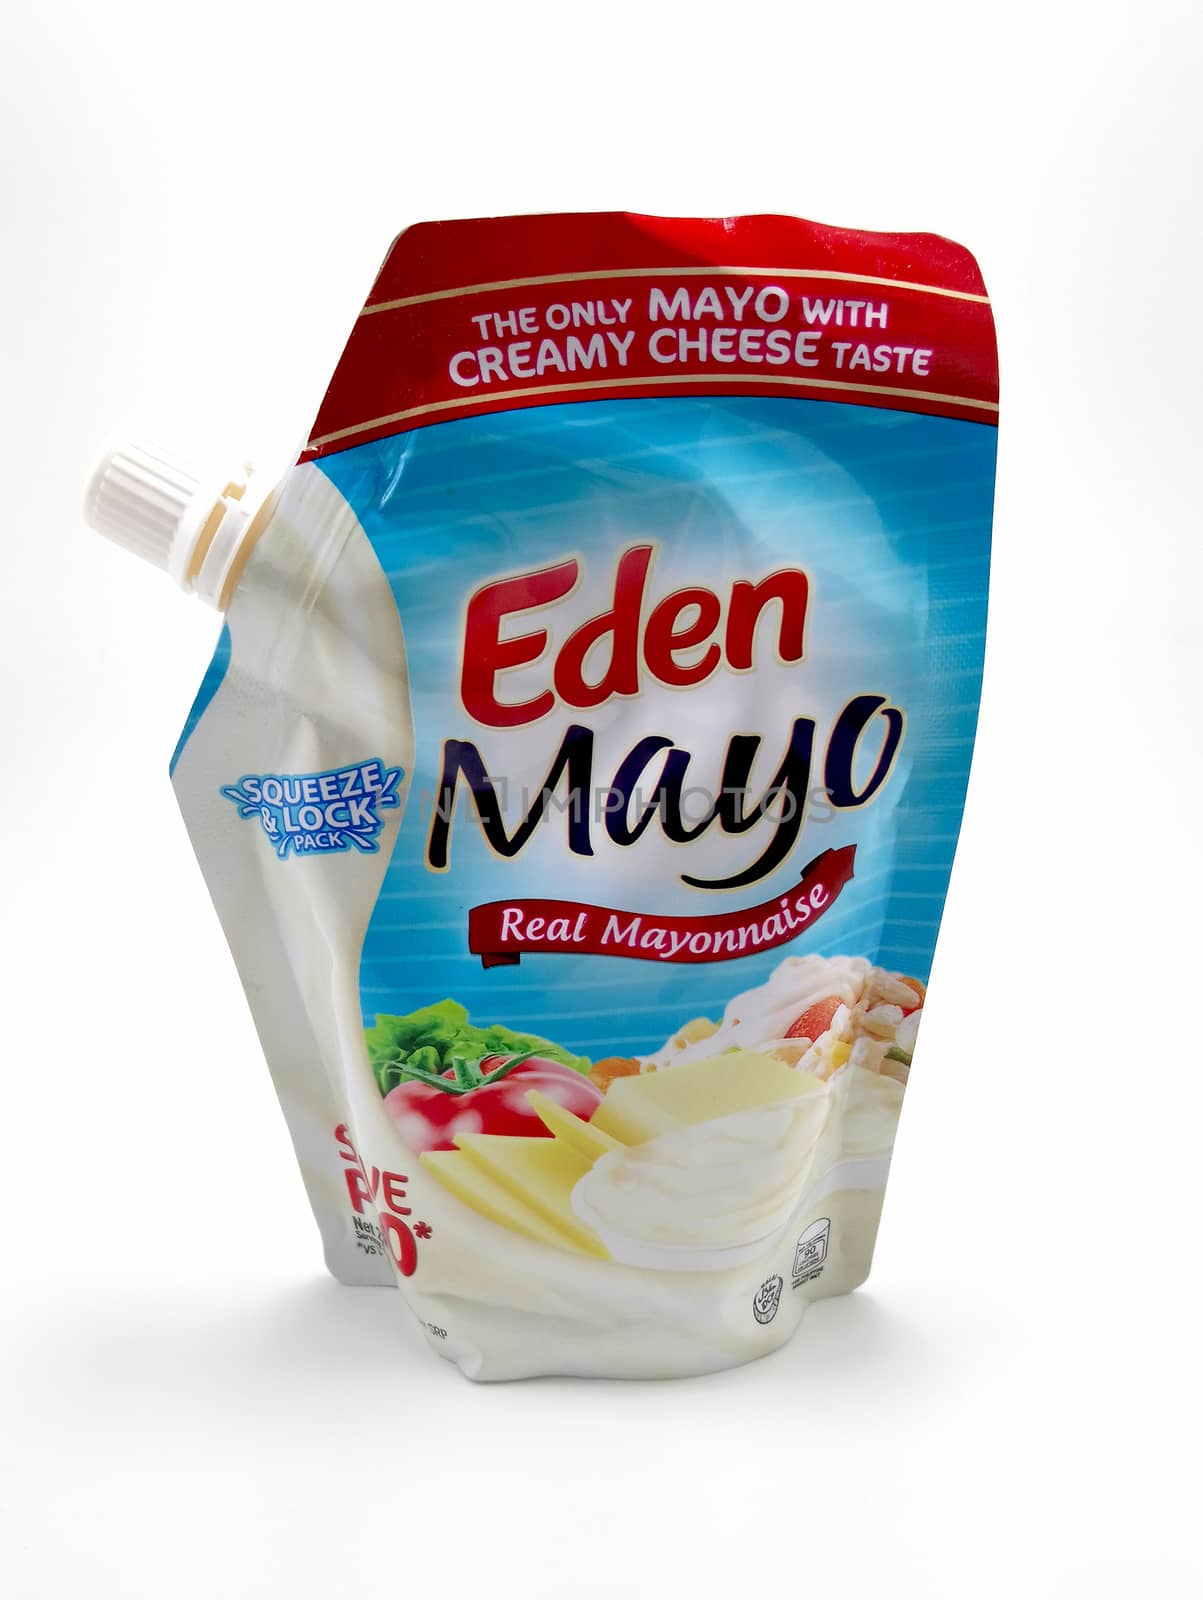 Eden mayo real mayonnaise pack in Manila, Philippines by imwaltersy